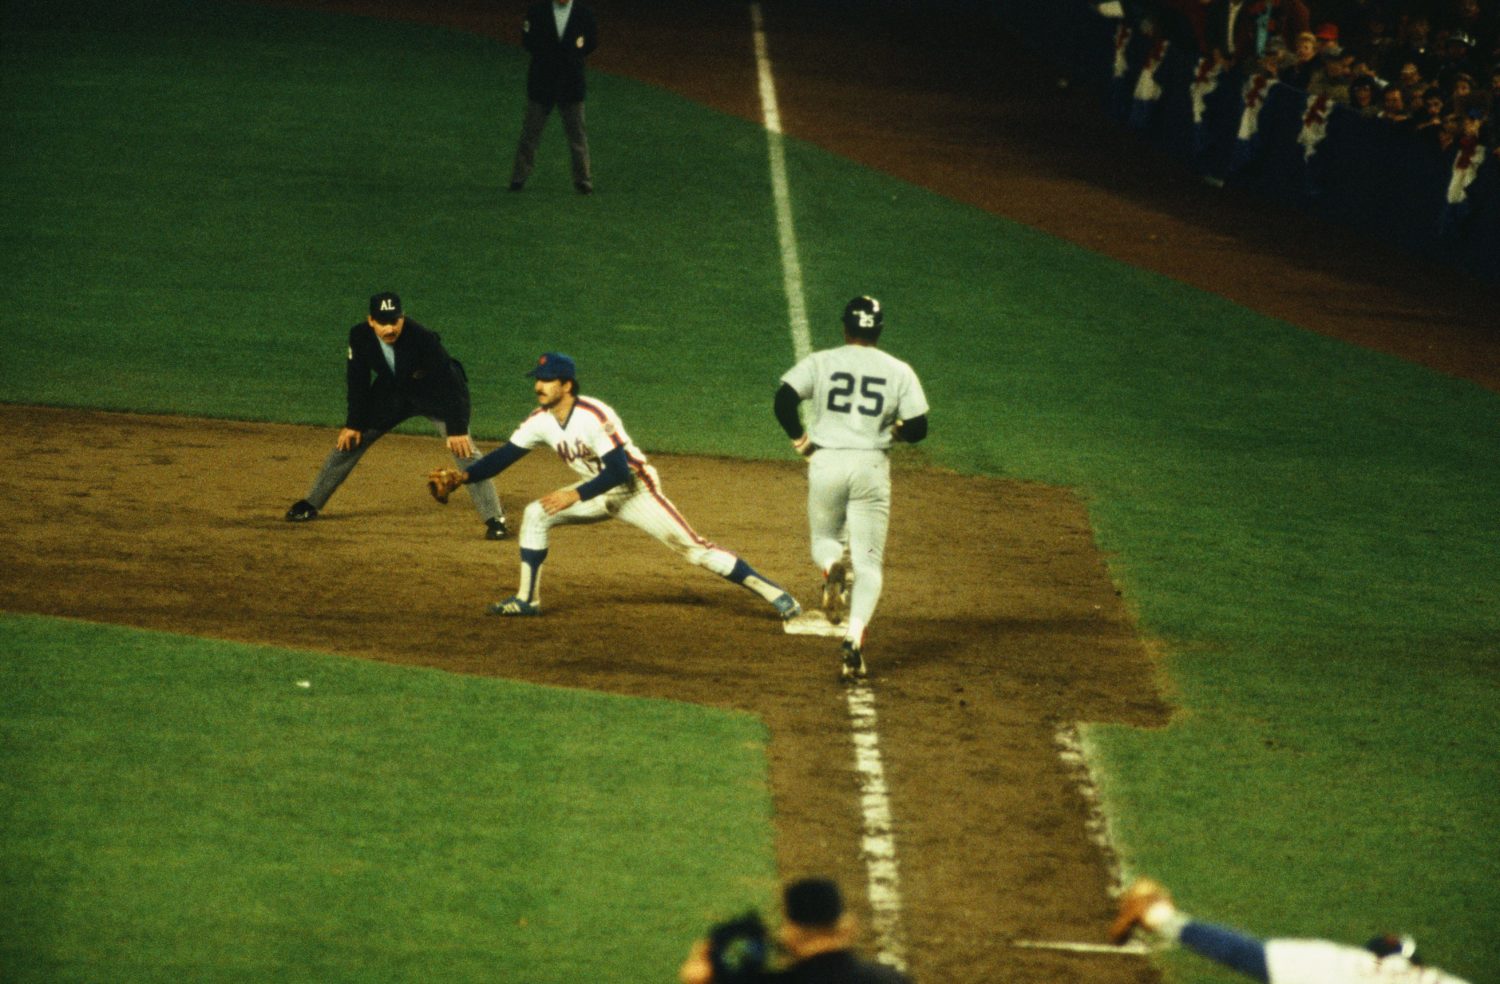 Keith Hernandez's stretches at first base to catch a ball as a runner touches the bag.